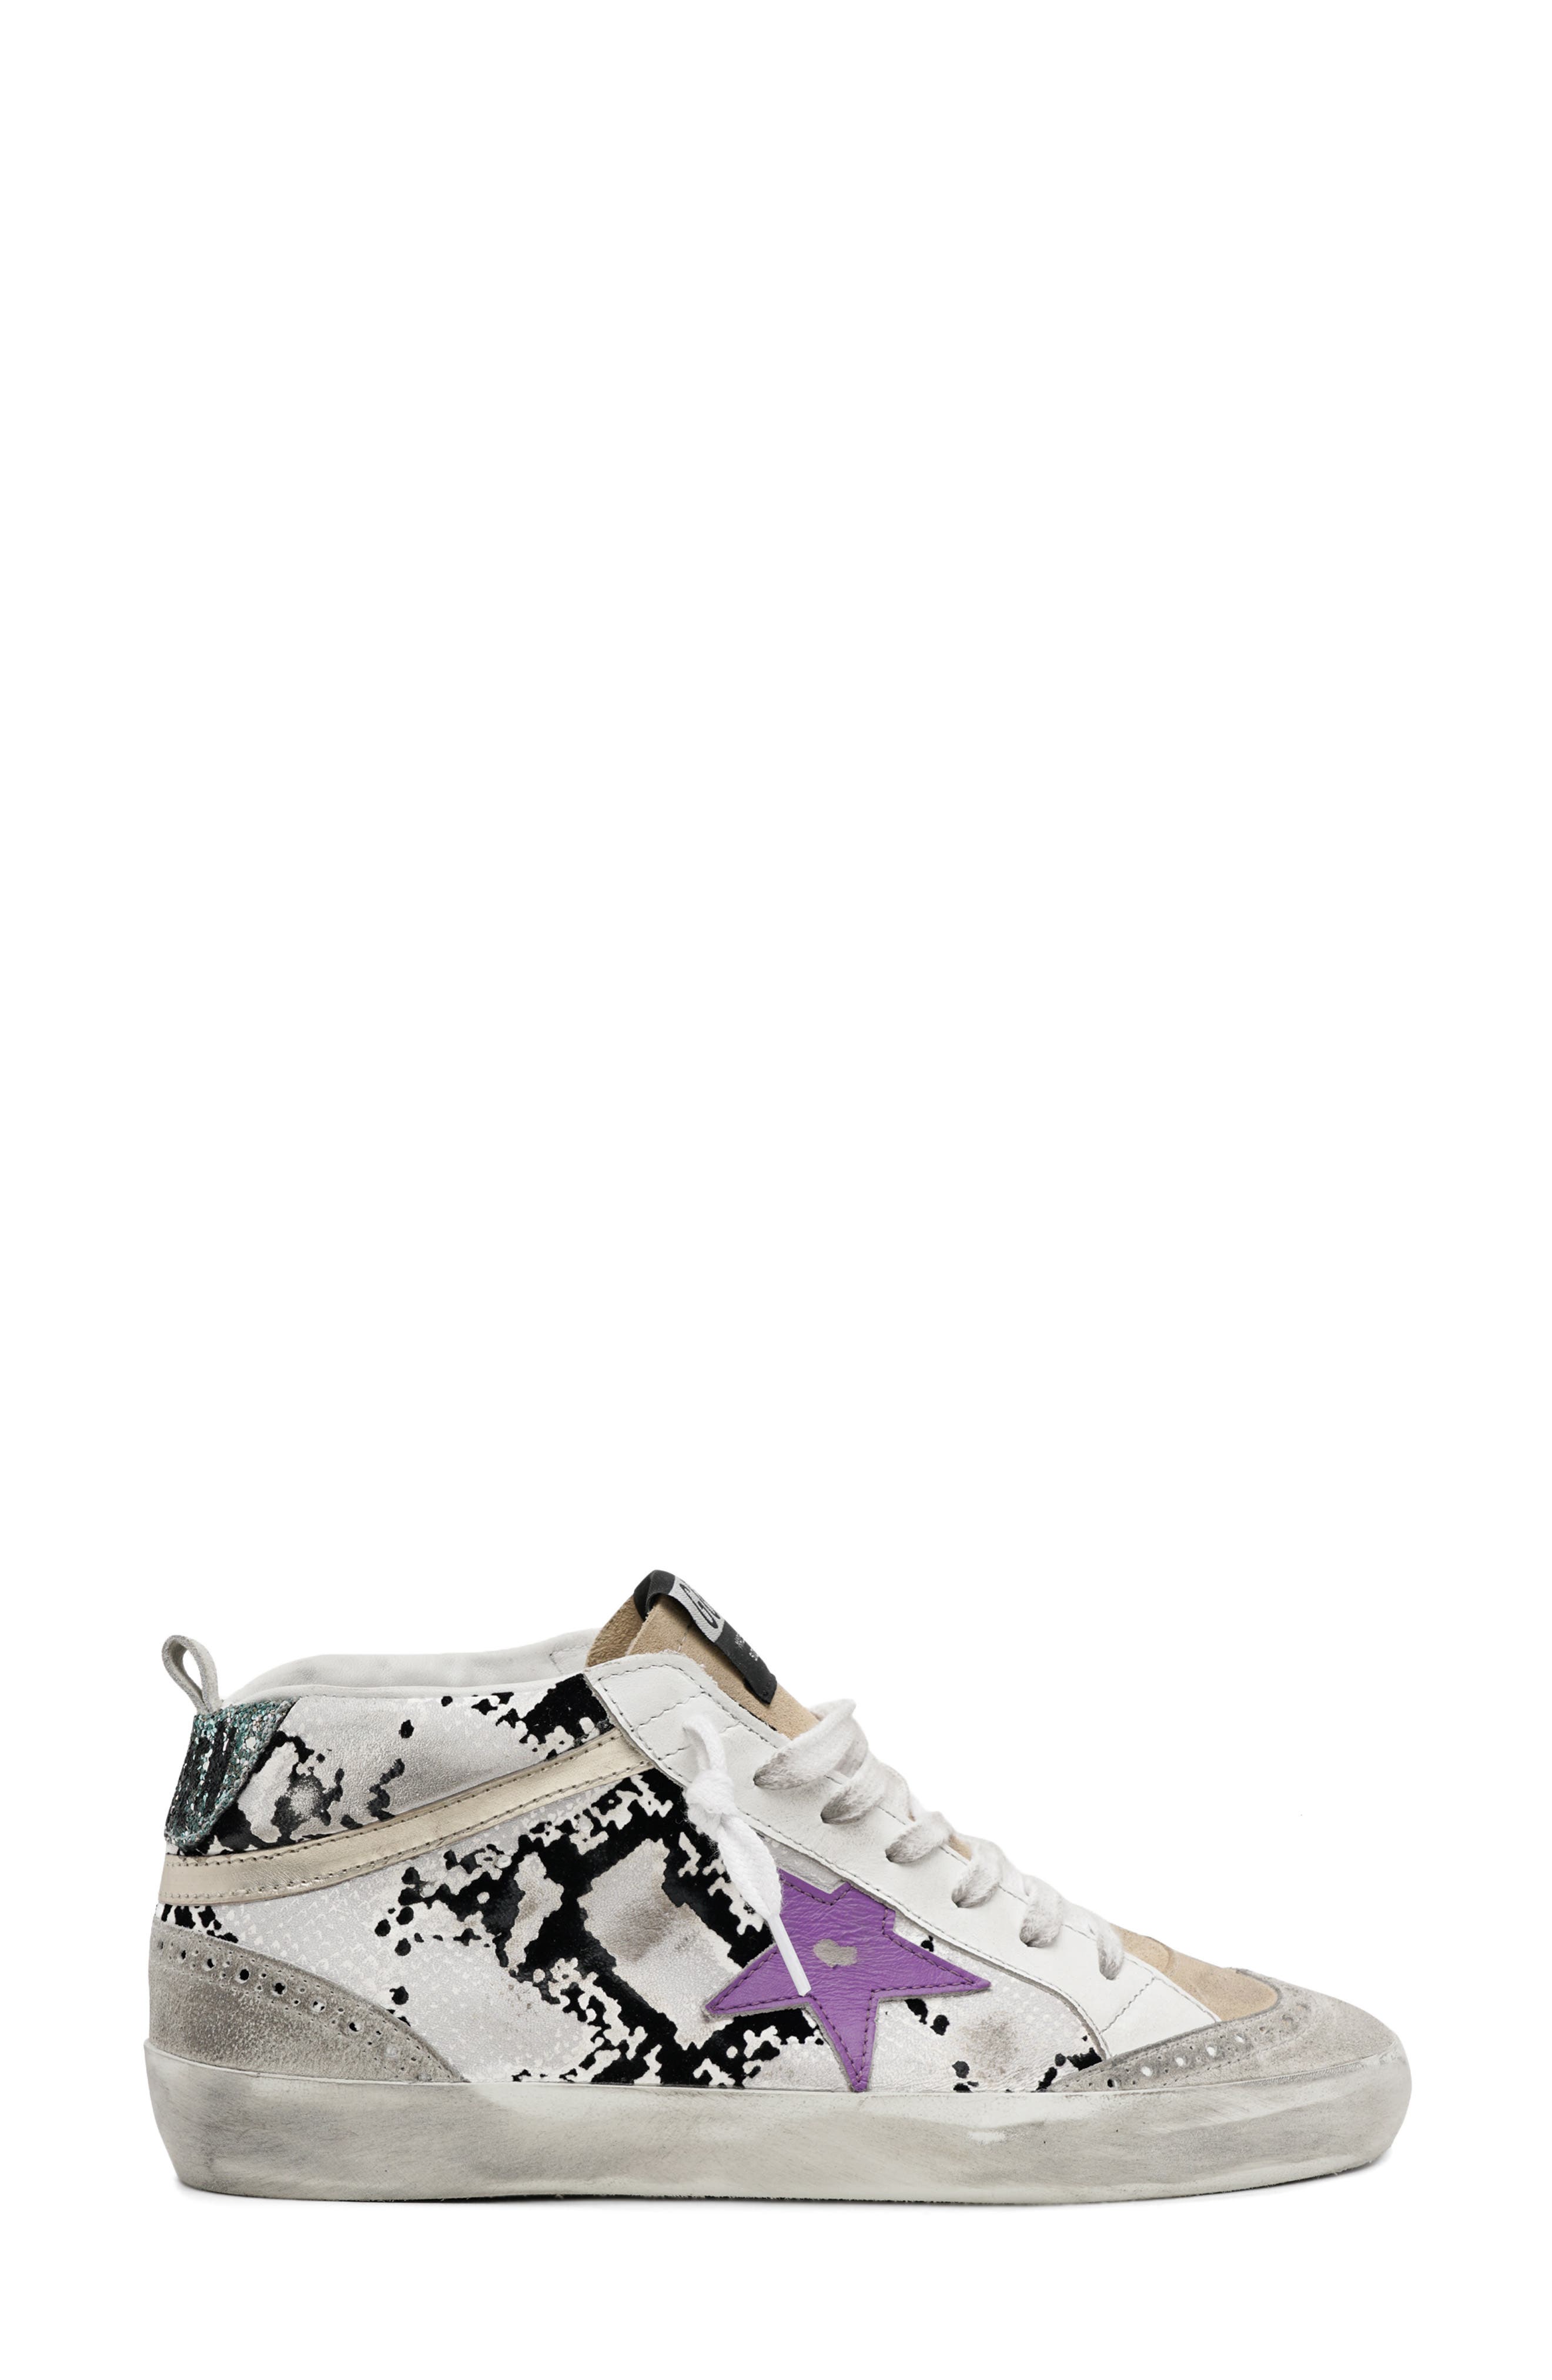 Golden Goose Mid Star Sneaker in Python/Ice/Brown/Purple at Nordstrom, Size 10Us